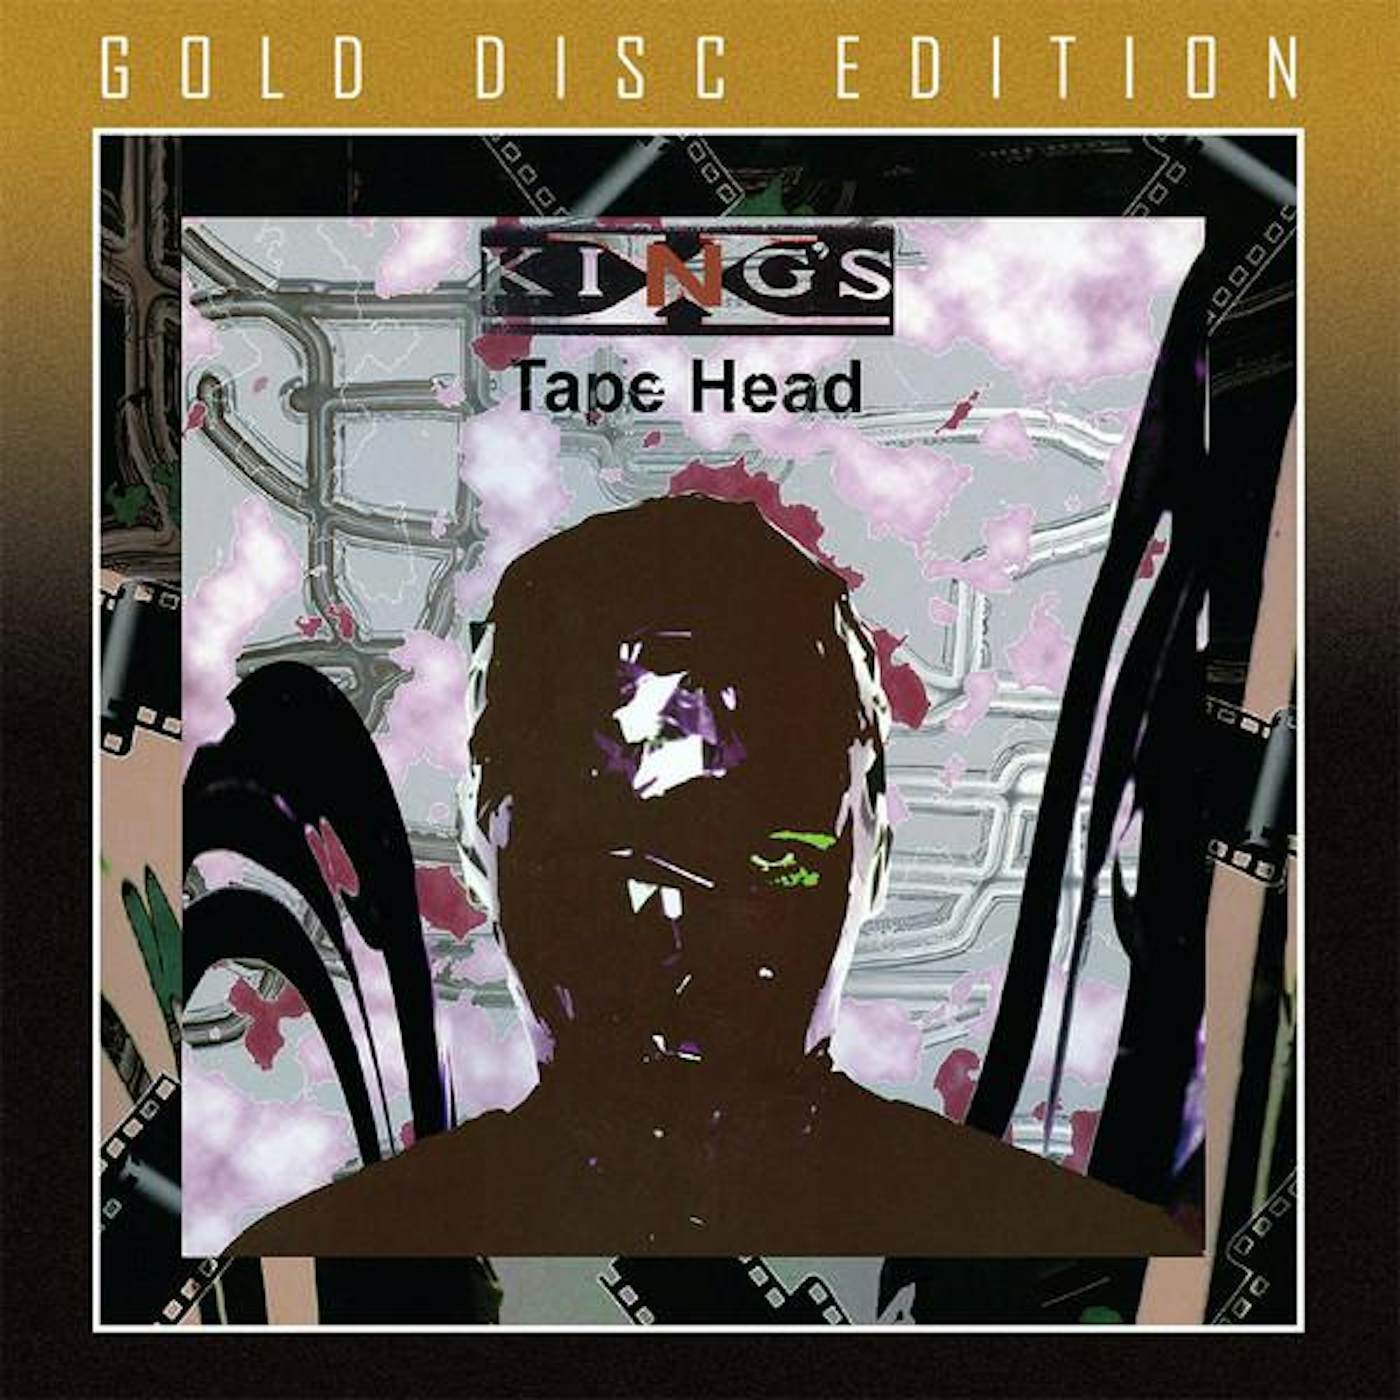 King's X TAPE HEAD (GOLD DISC EDITION) CD